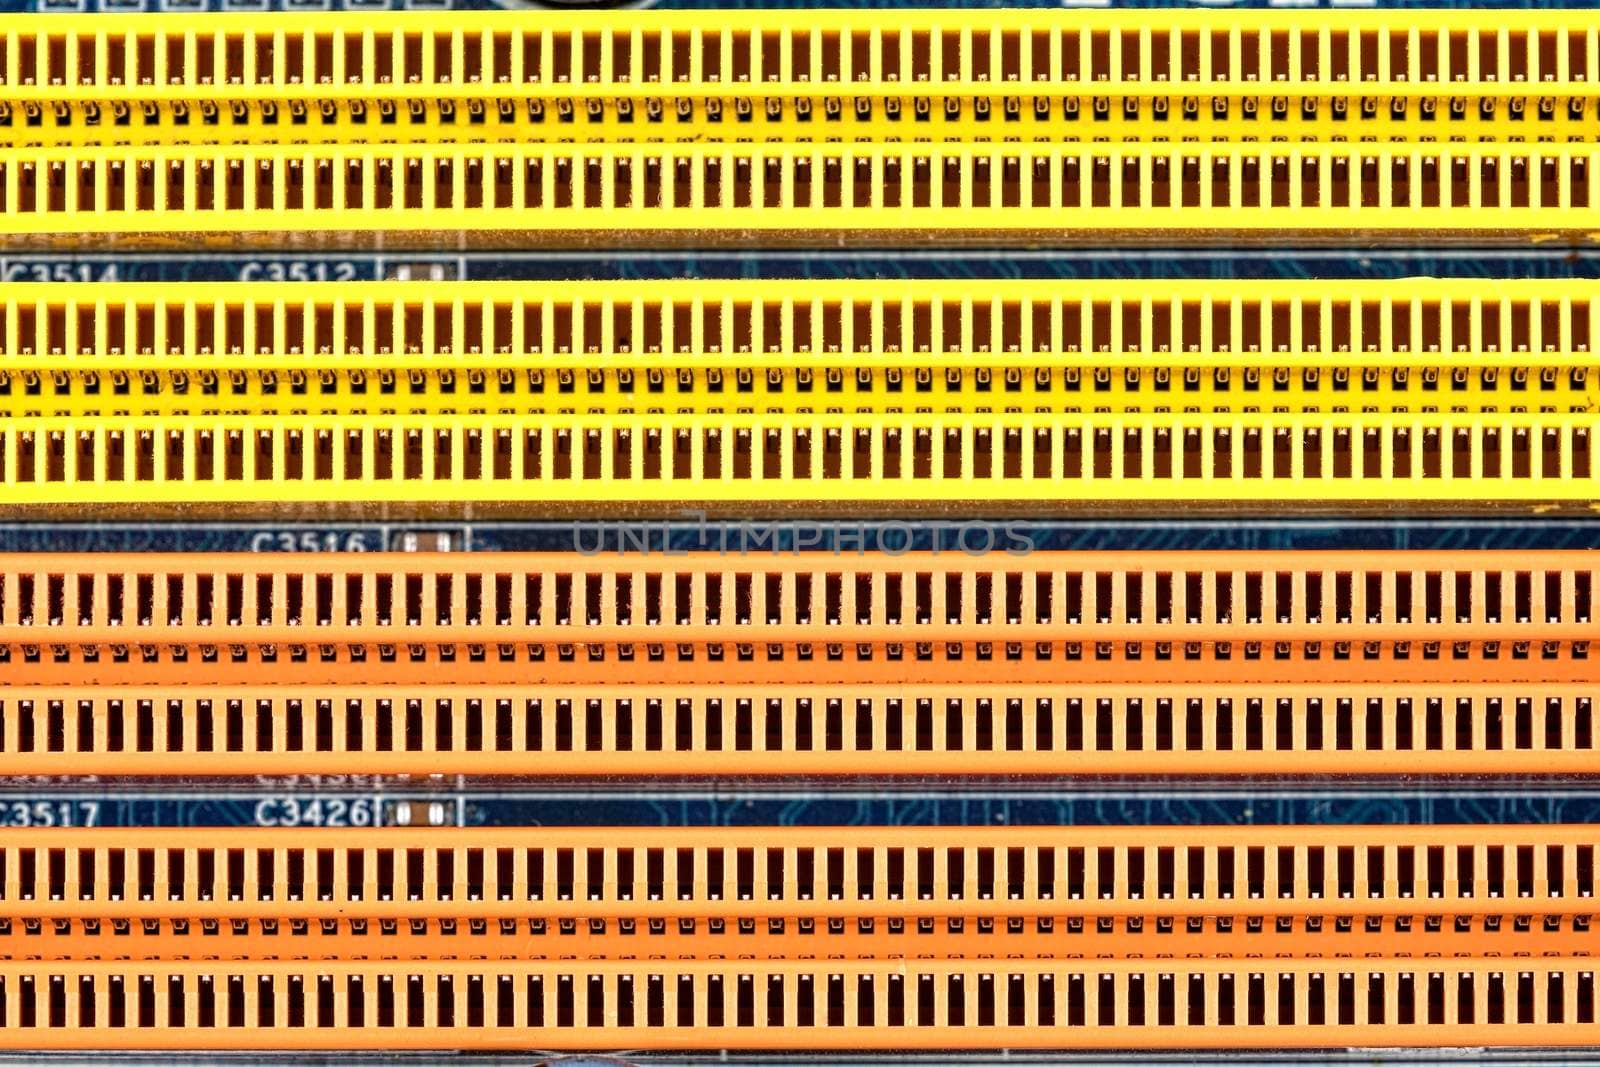 Memory slots, a background or texture